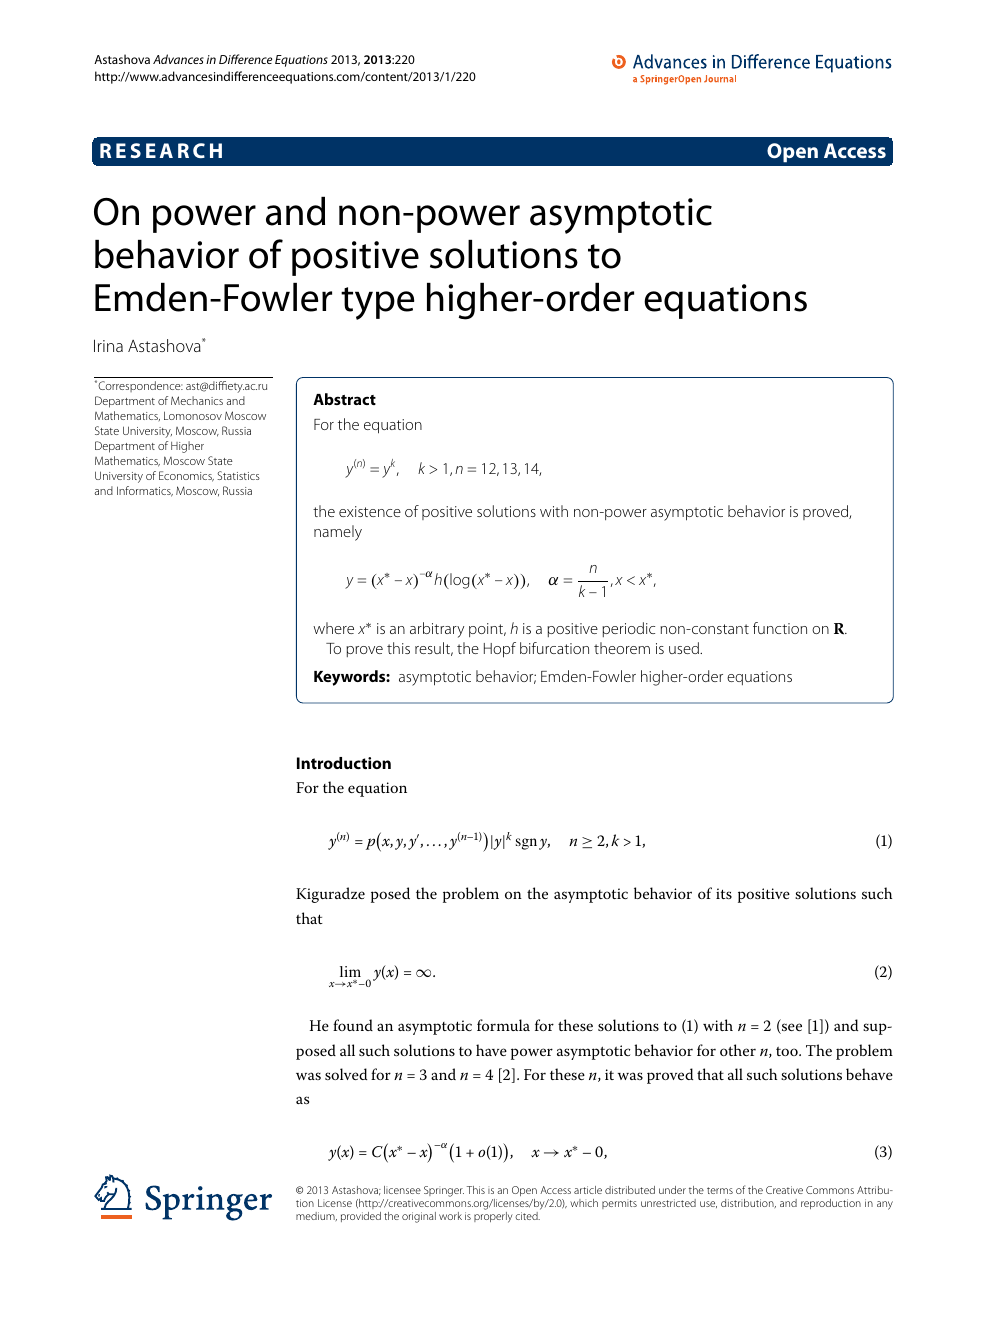 On Power And Non Power Asymptotic Behavior Of Positive Solutions To Emden Fowler Type Higher Order Equations Topic Of Research Paper In Mathematics Download Scholarly Article Pdf And Read For Free On Cyberleninka Open